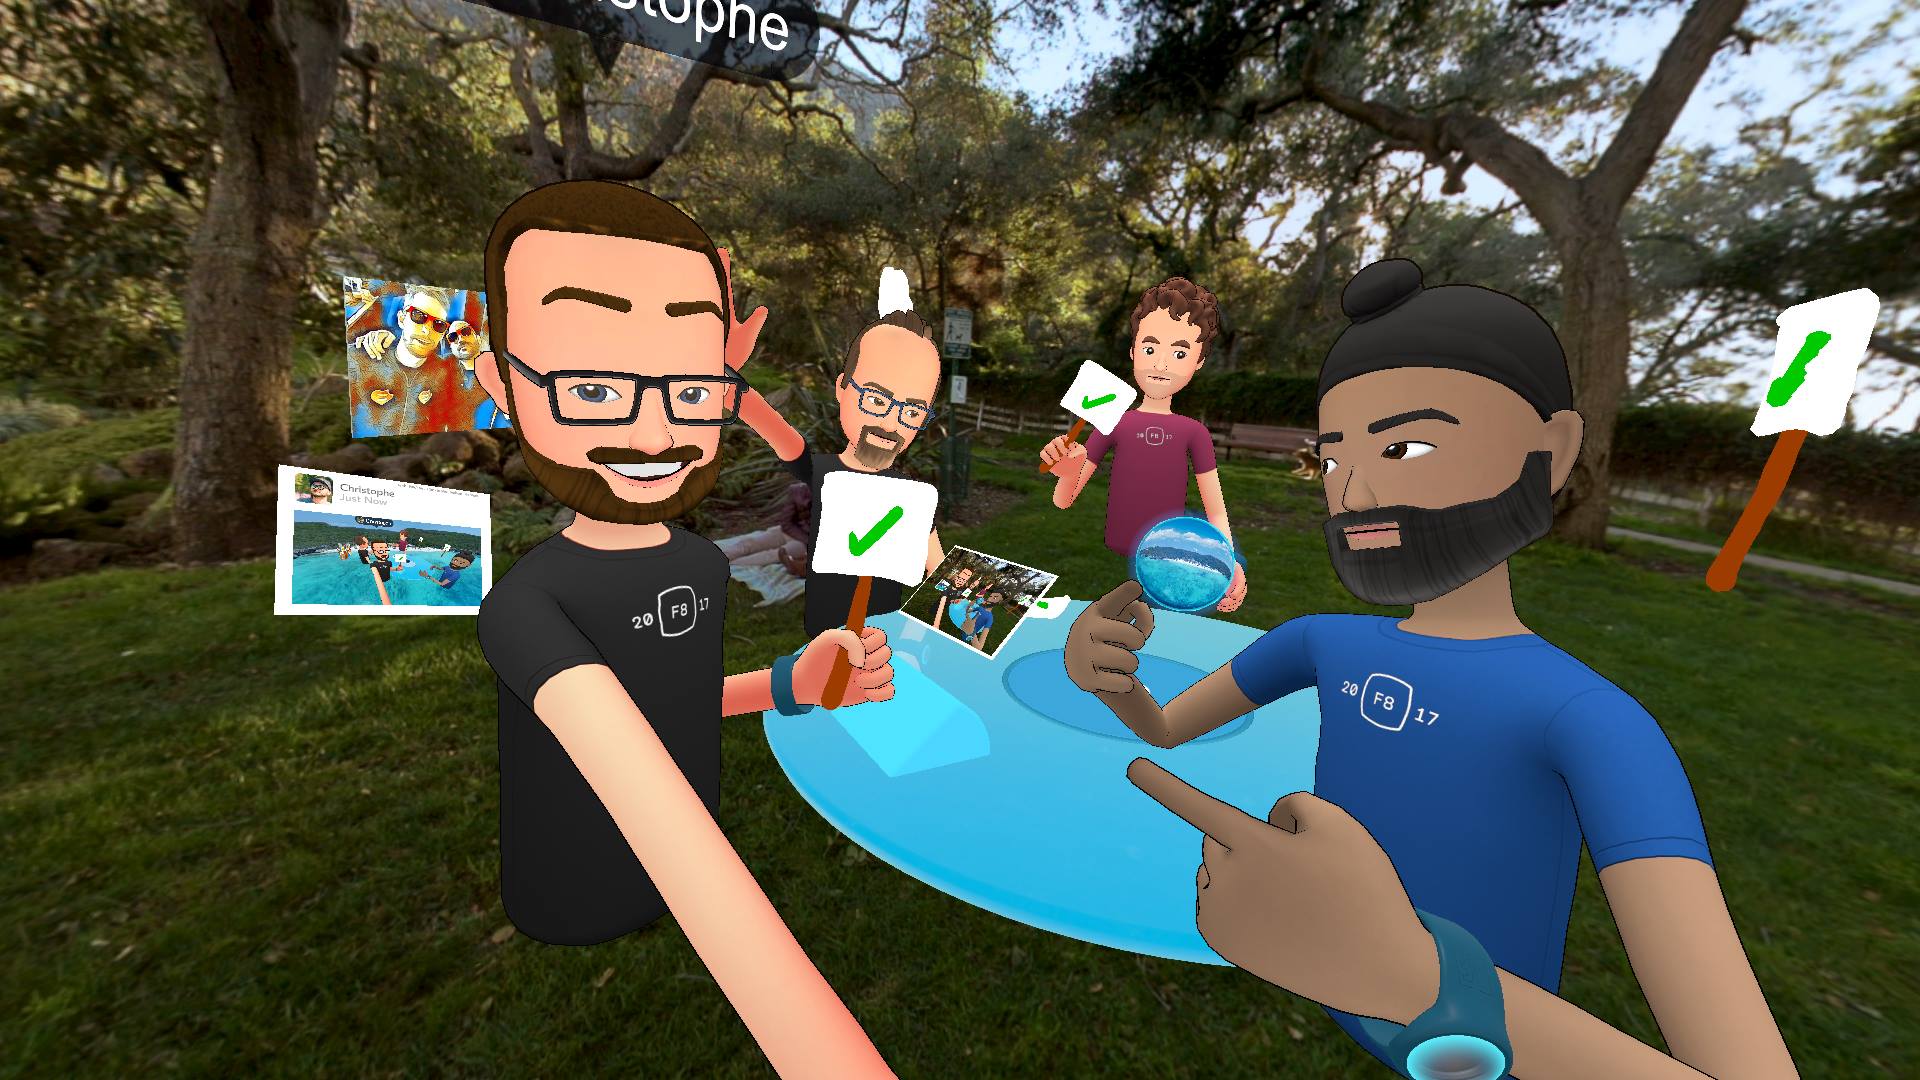 Facebook Spaces finally delivers on social VR